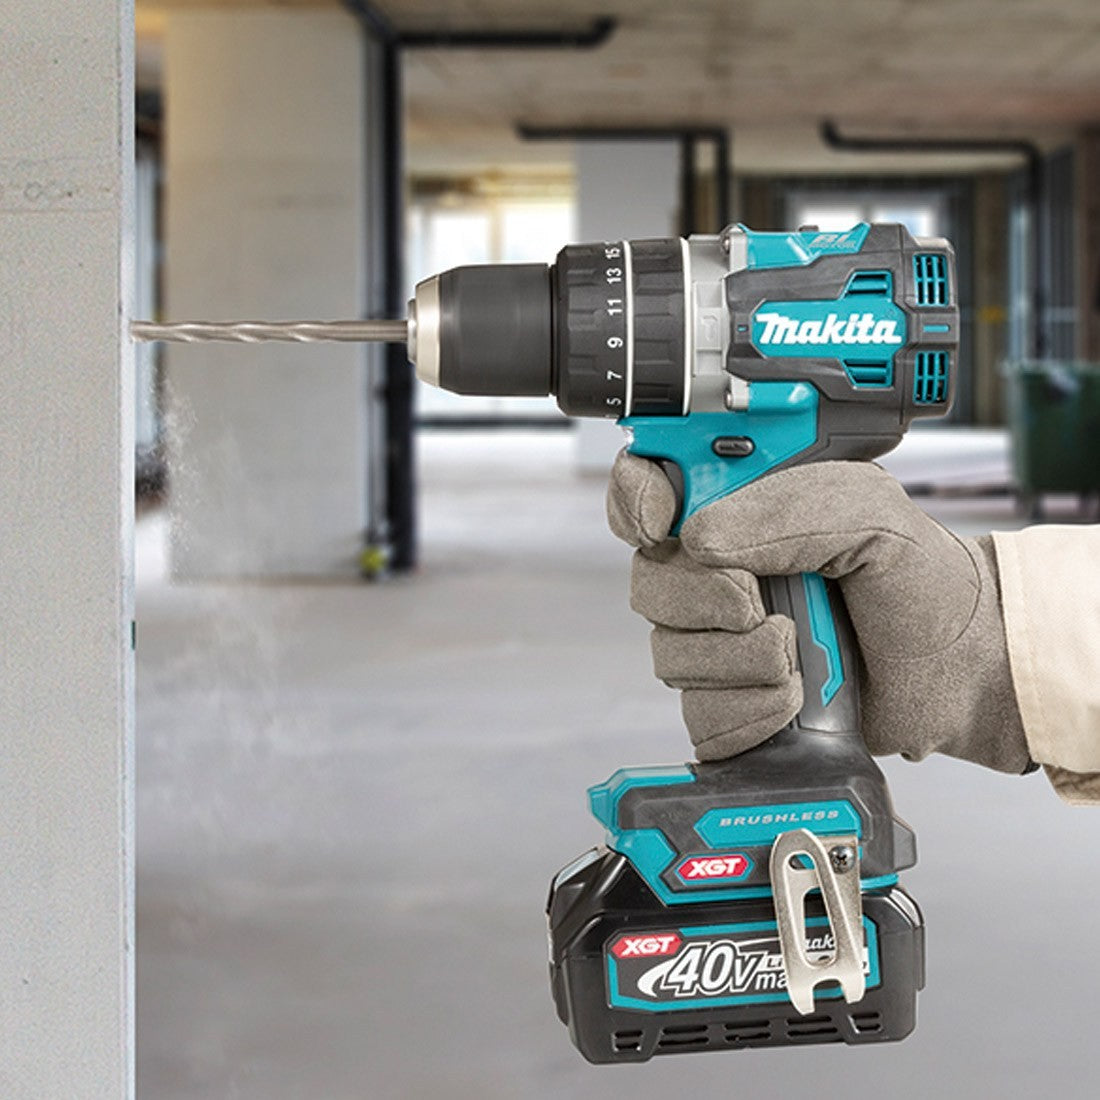 Makita HP002GZ Cordless Brushless Hammer Driver Drill  13mm (1/2″) 65 N·m (580 in.lbs.) 40Vmax XGT® Li-Ion (Bare Tool Only)